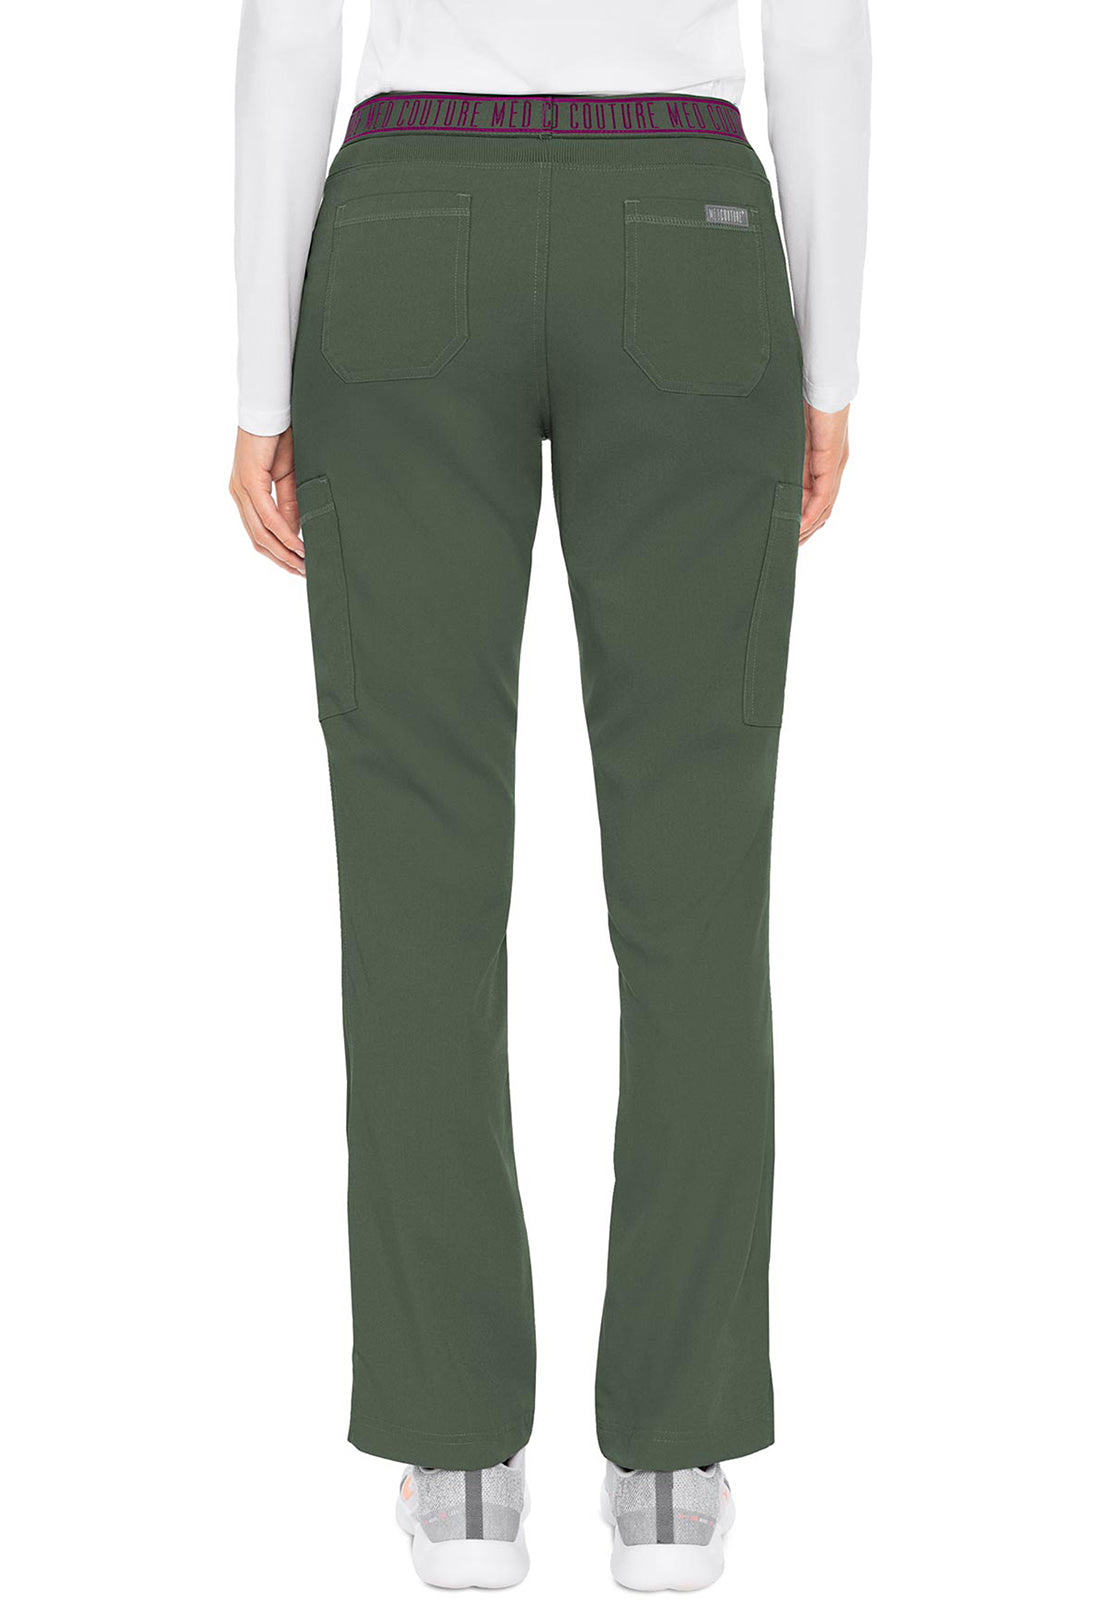 Med Couture Touch Yoga 2 Cargo Pocket Pant (16 Colors 3XL-5XL Regular Length)